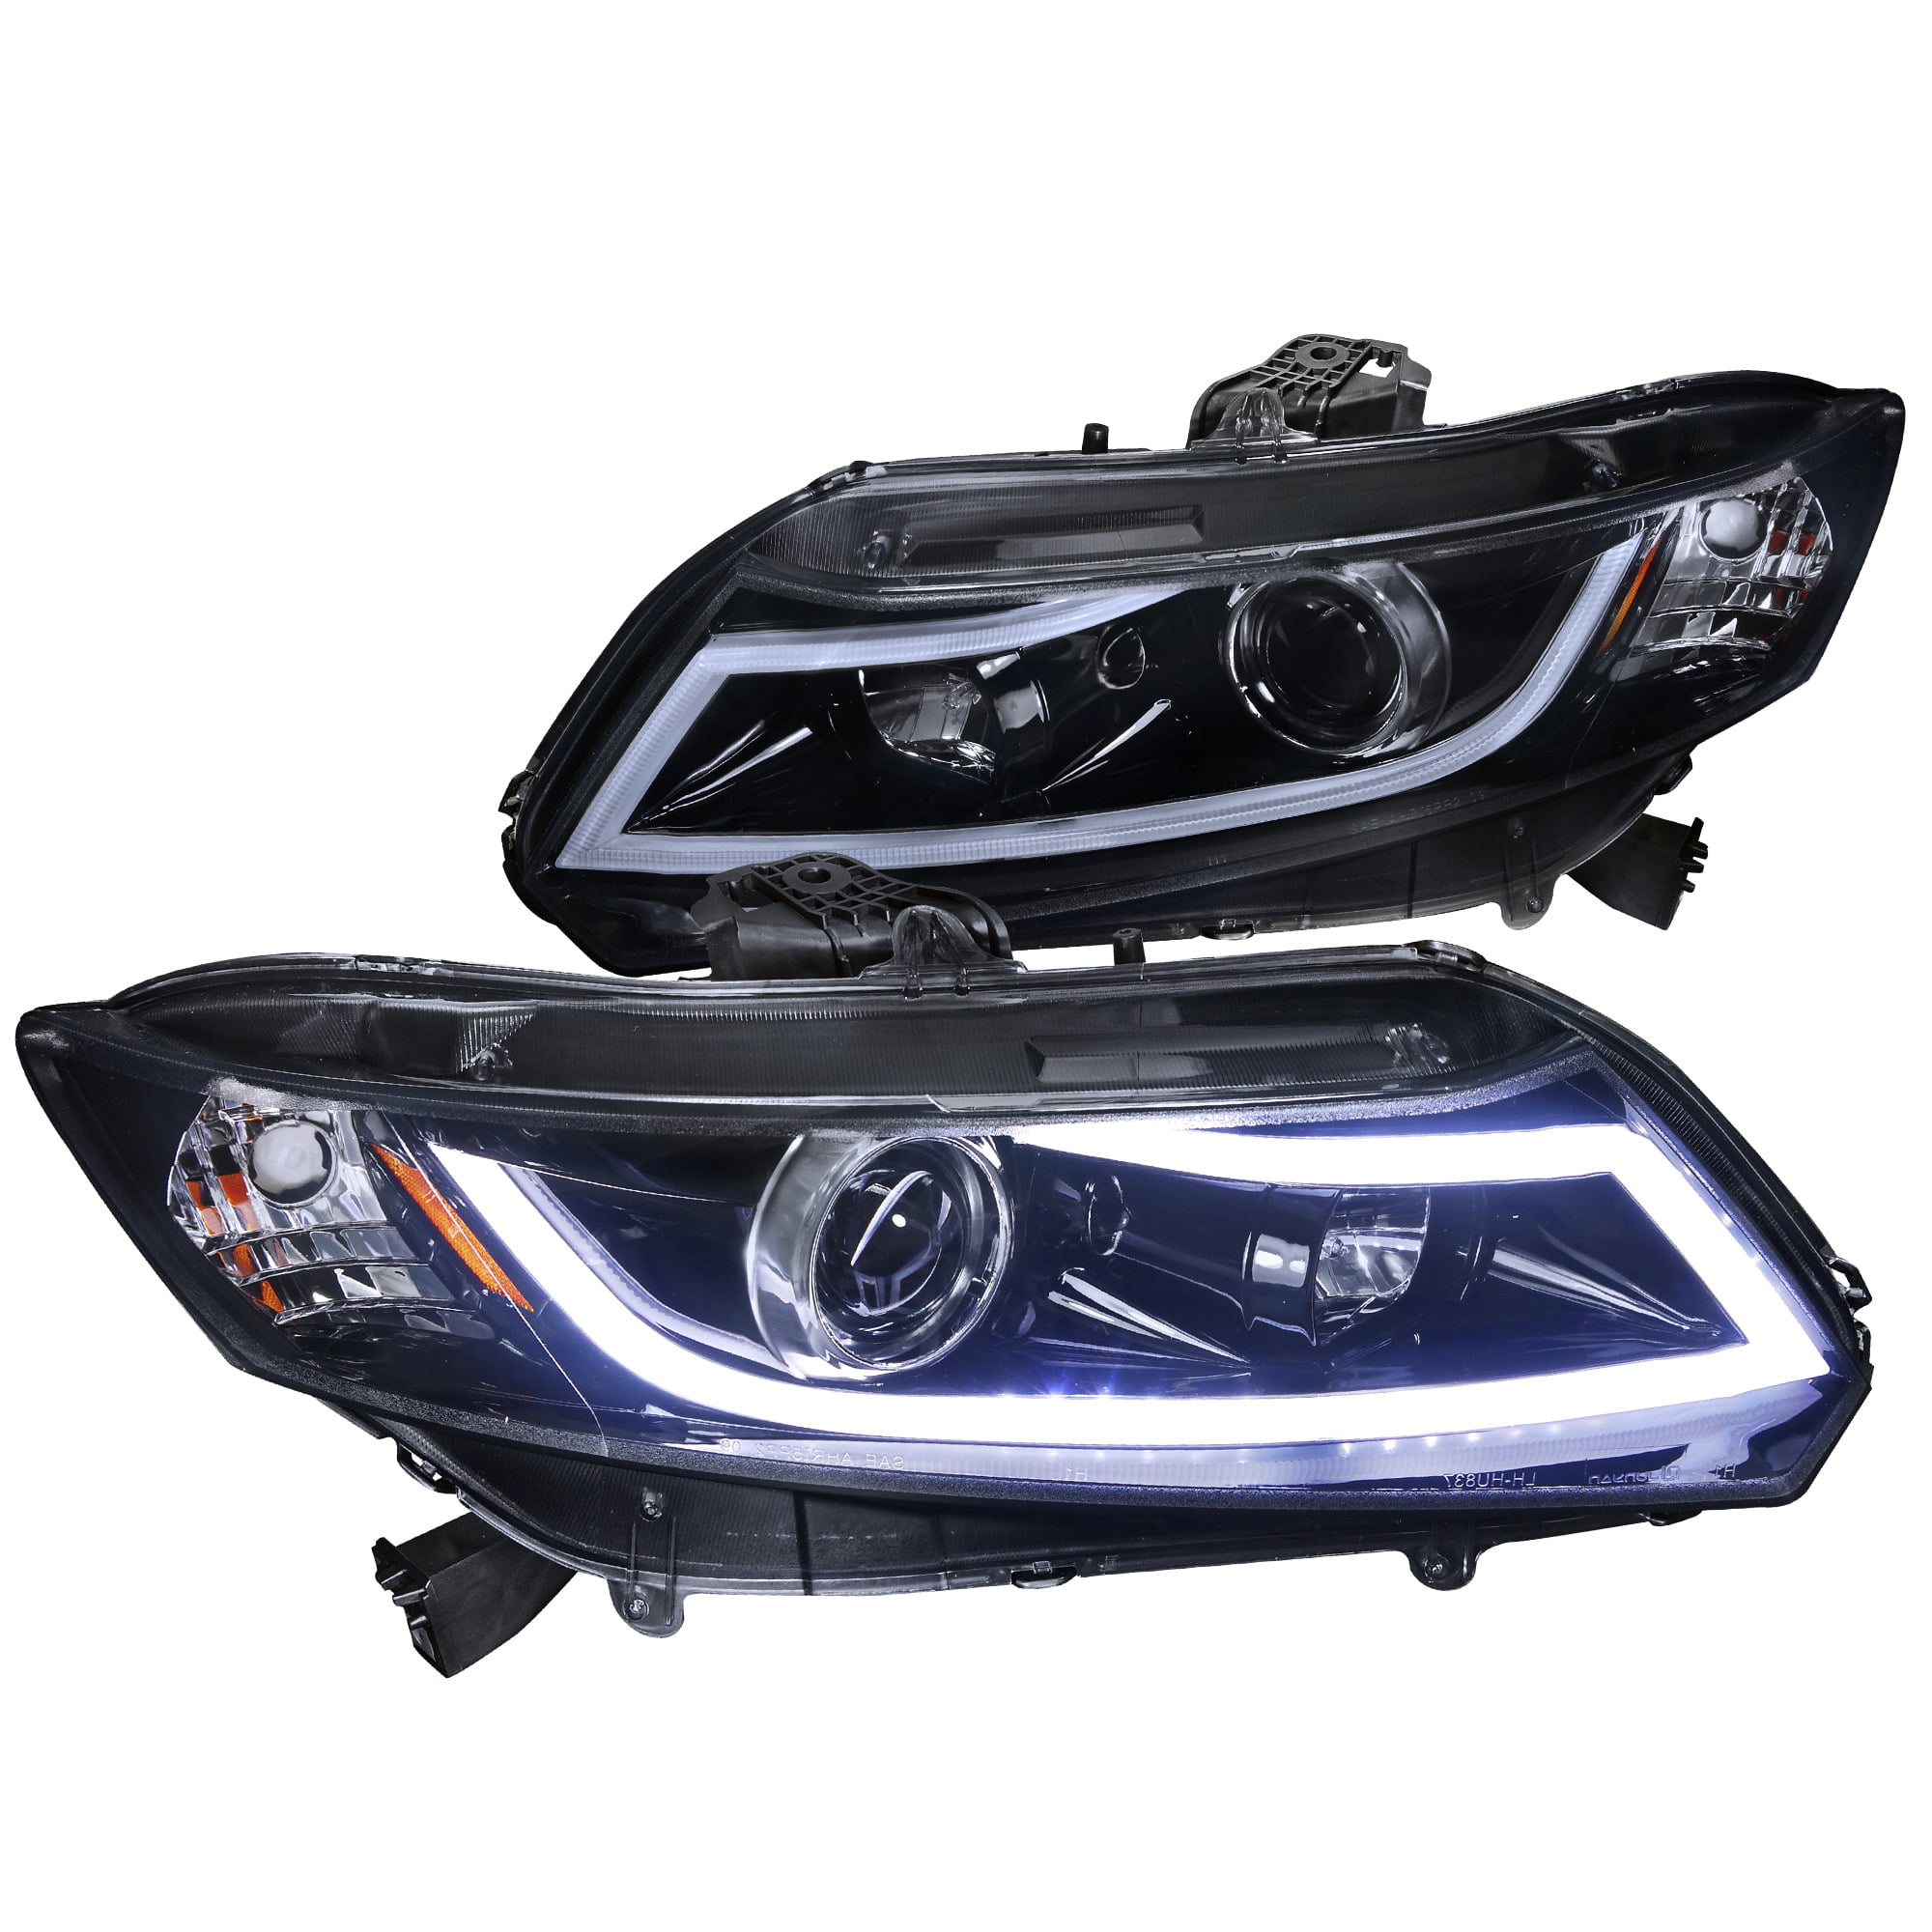 Spec-D Tuning Black Tail Lights for 2006-2011 Honda Civic 2Dr Coupe Taillights Assembly Left Right Pair 